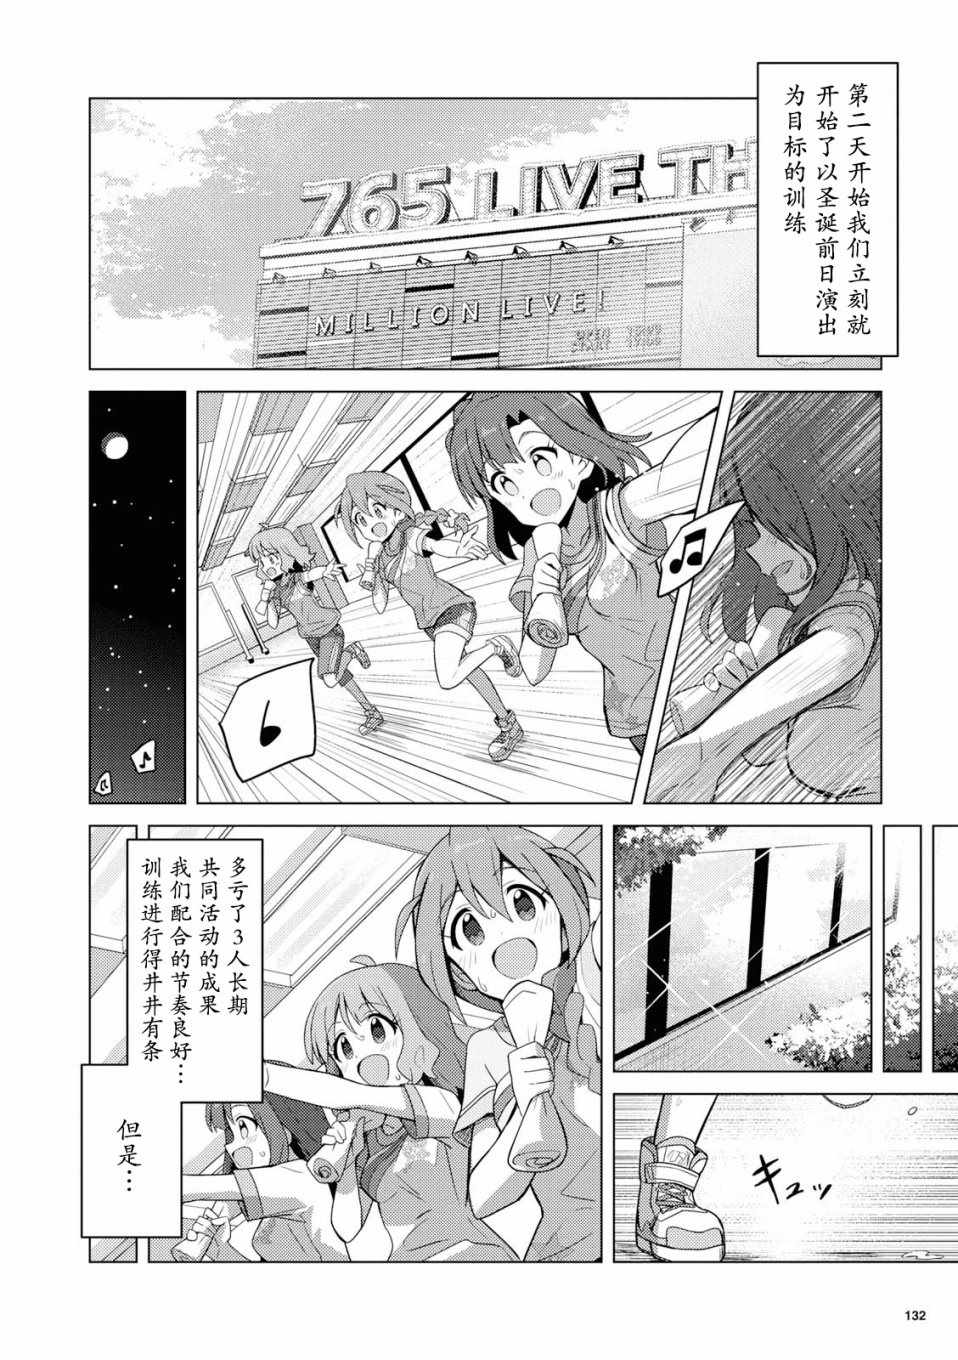 《THE IDOLM@STER MILLION LIVE! Brand New Song》漫画 Brand New Song 015集